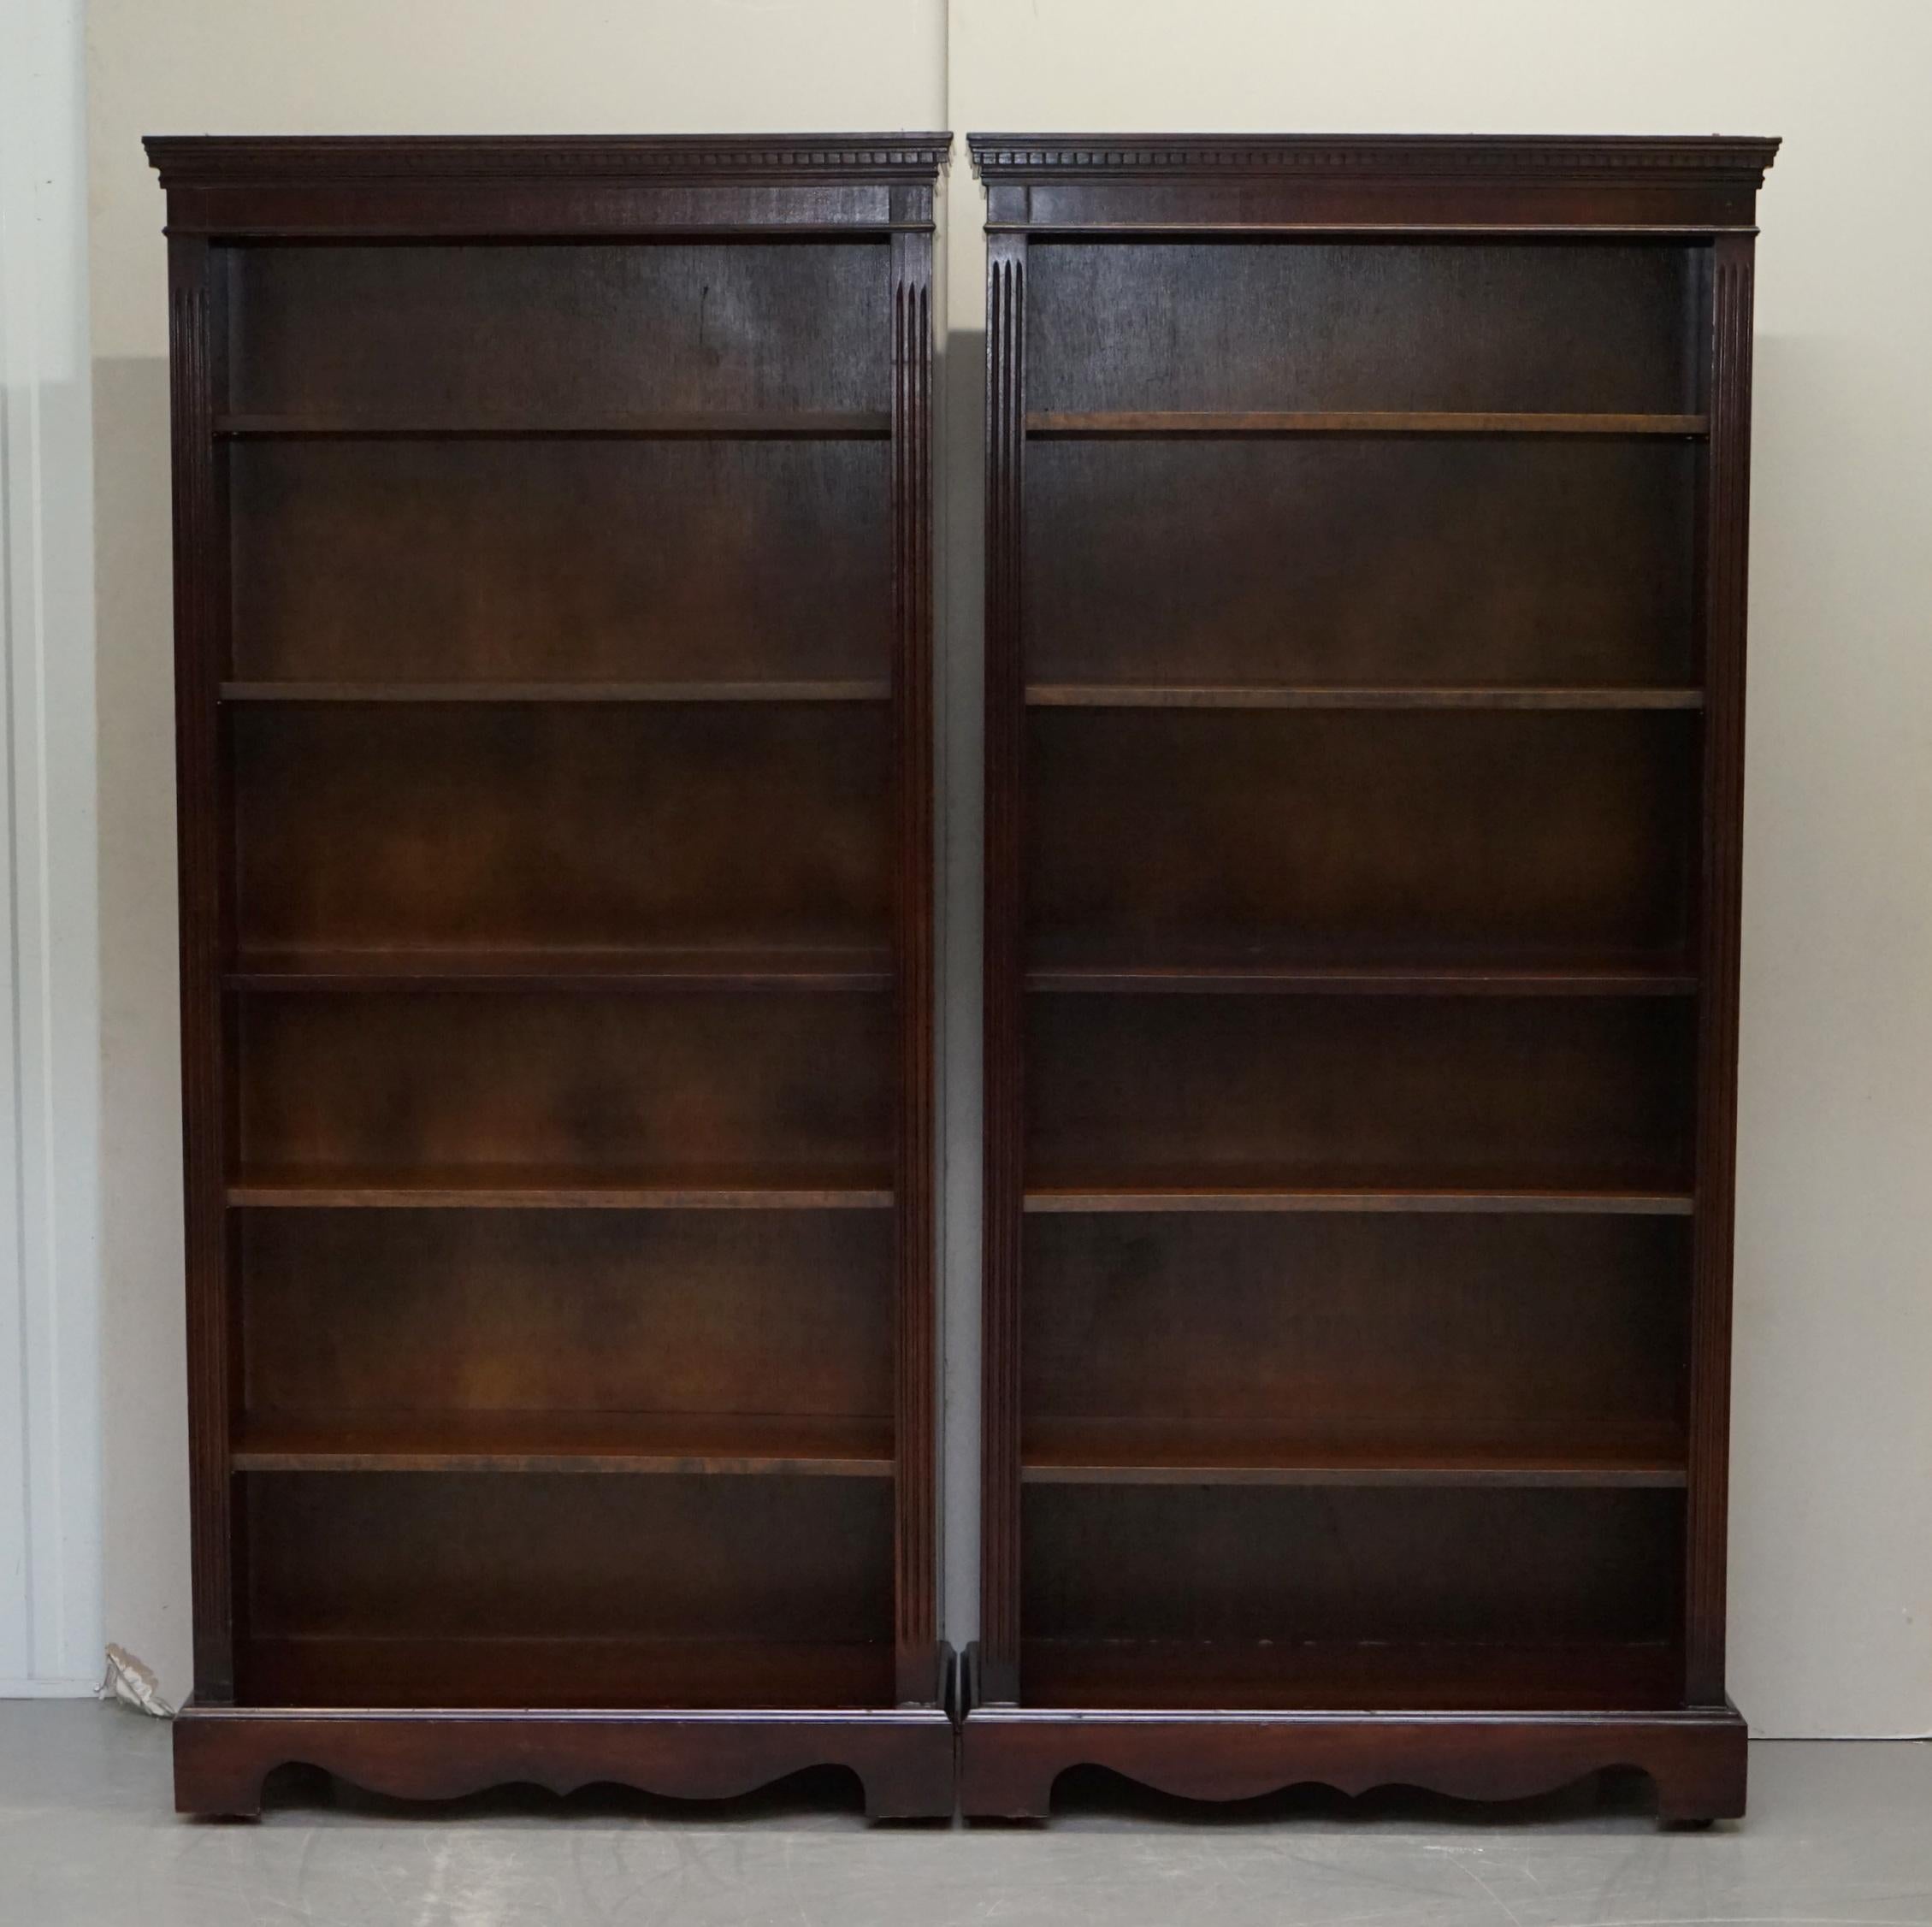 We are delighted to offer for sale this stunning pair of Vintage mahogany framed library bookcases on wheels with height adjustable shelves

A very good looking well made and decorative pair of bookcases. The are very utilitarian and look good in